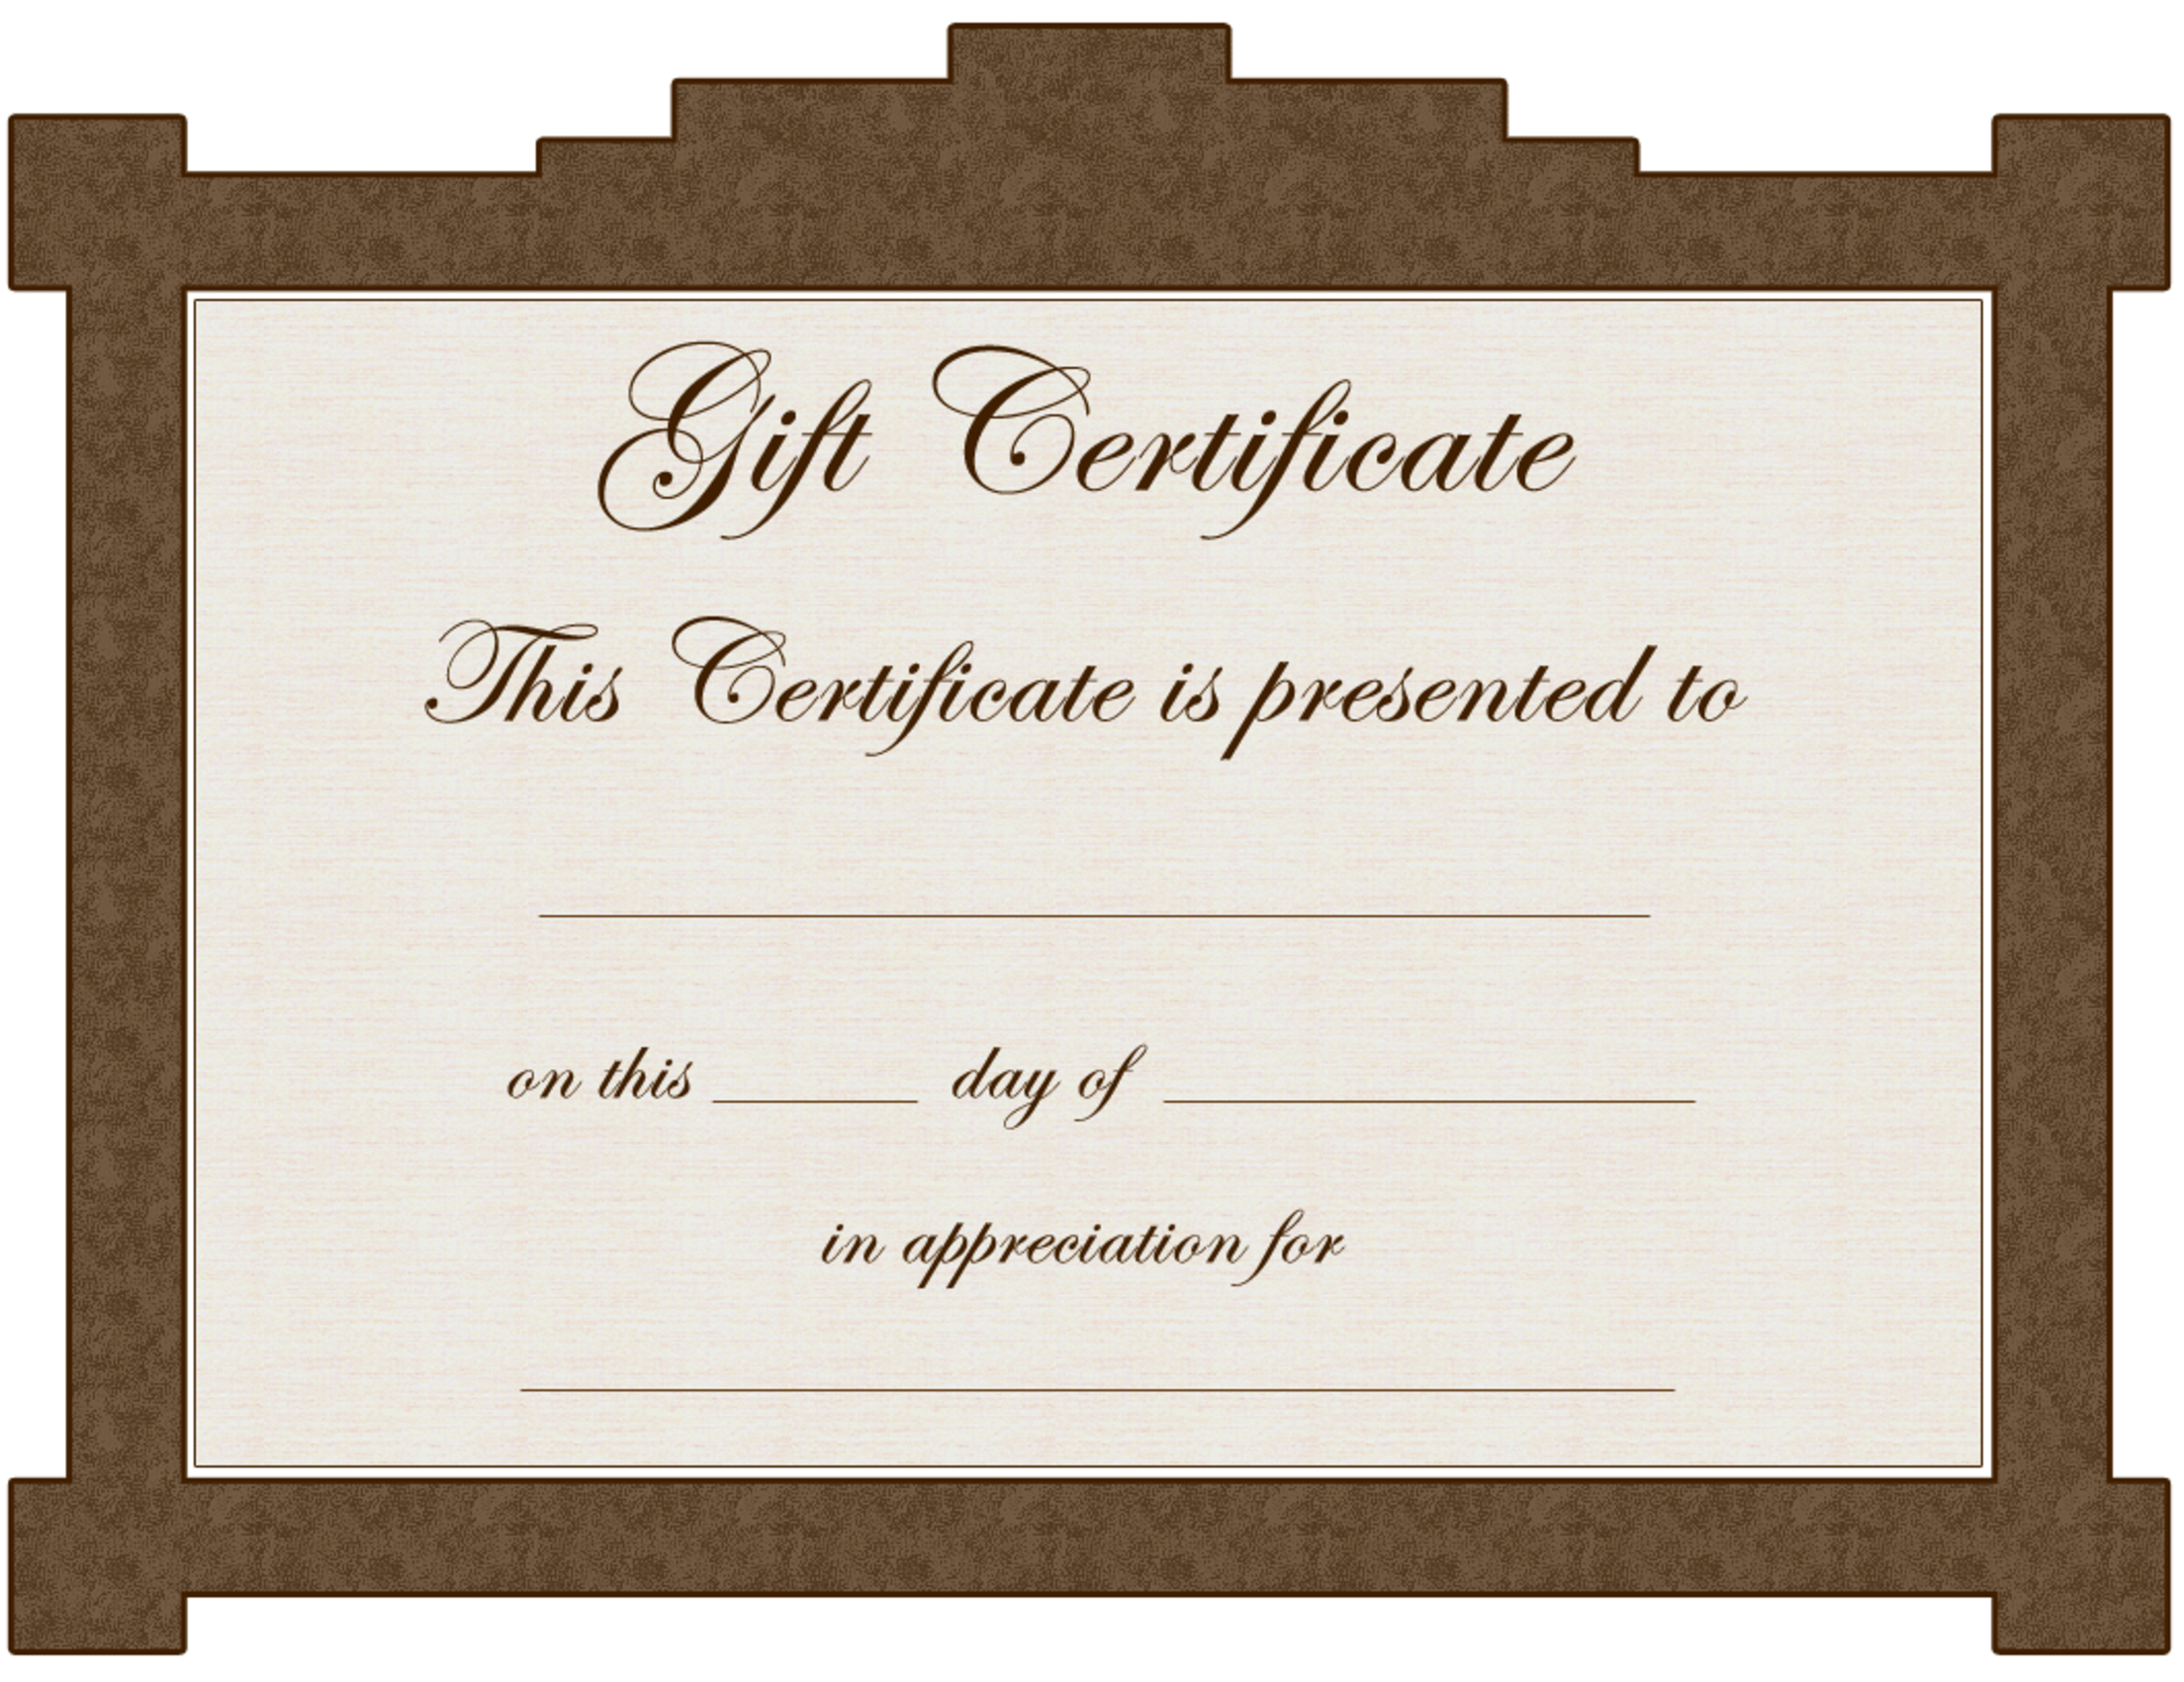 Clipart Gift Certificate Template For Microsoft Gift Certificate Template Free Word